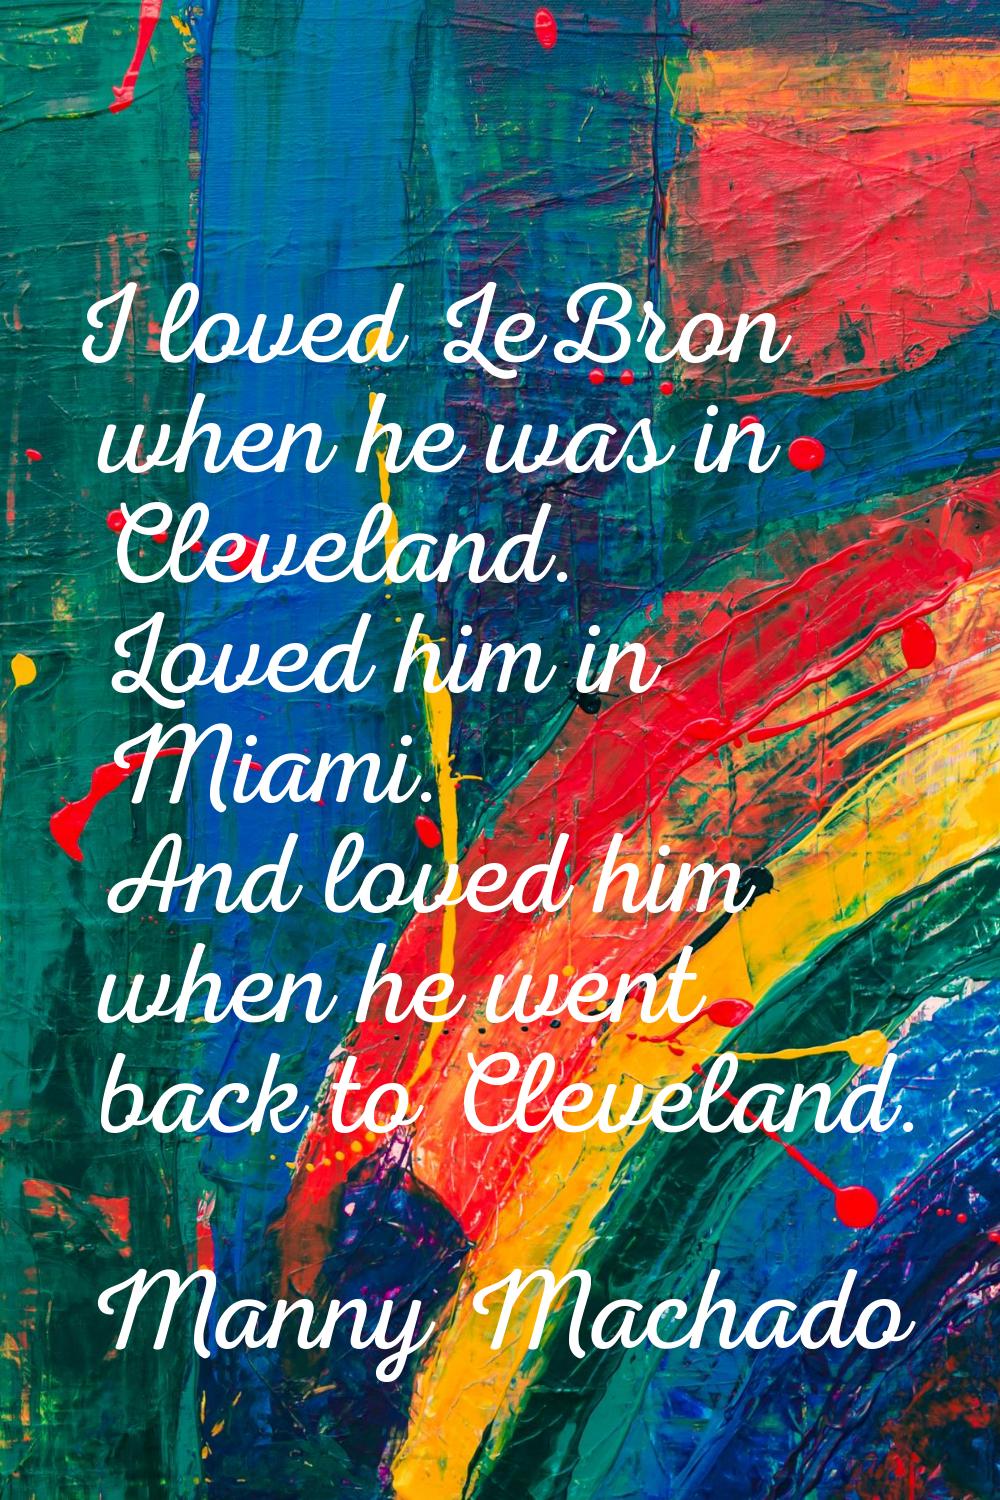 I loved LeBron when he was in Cleveland. Loved him in Miami. And loved him when he went back to Cle